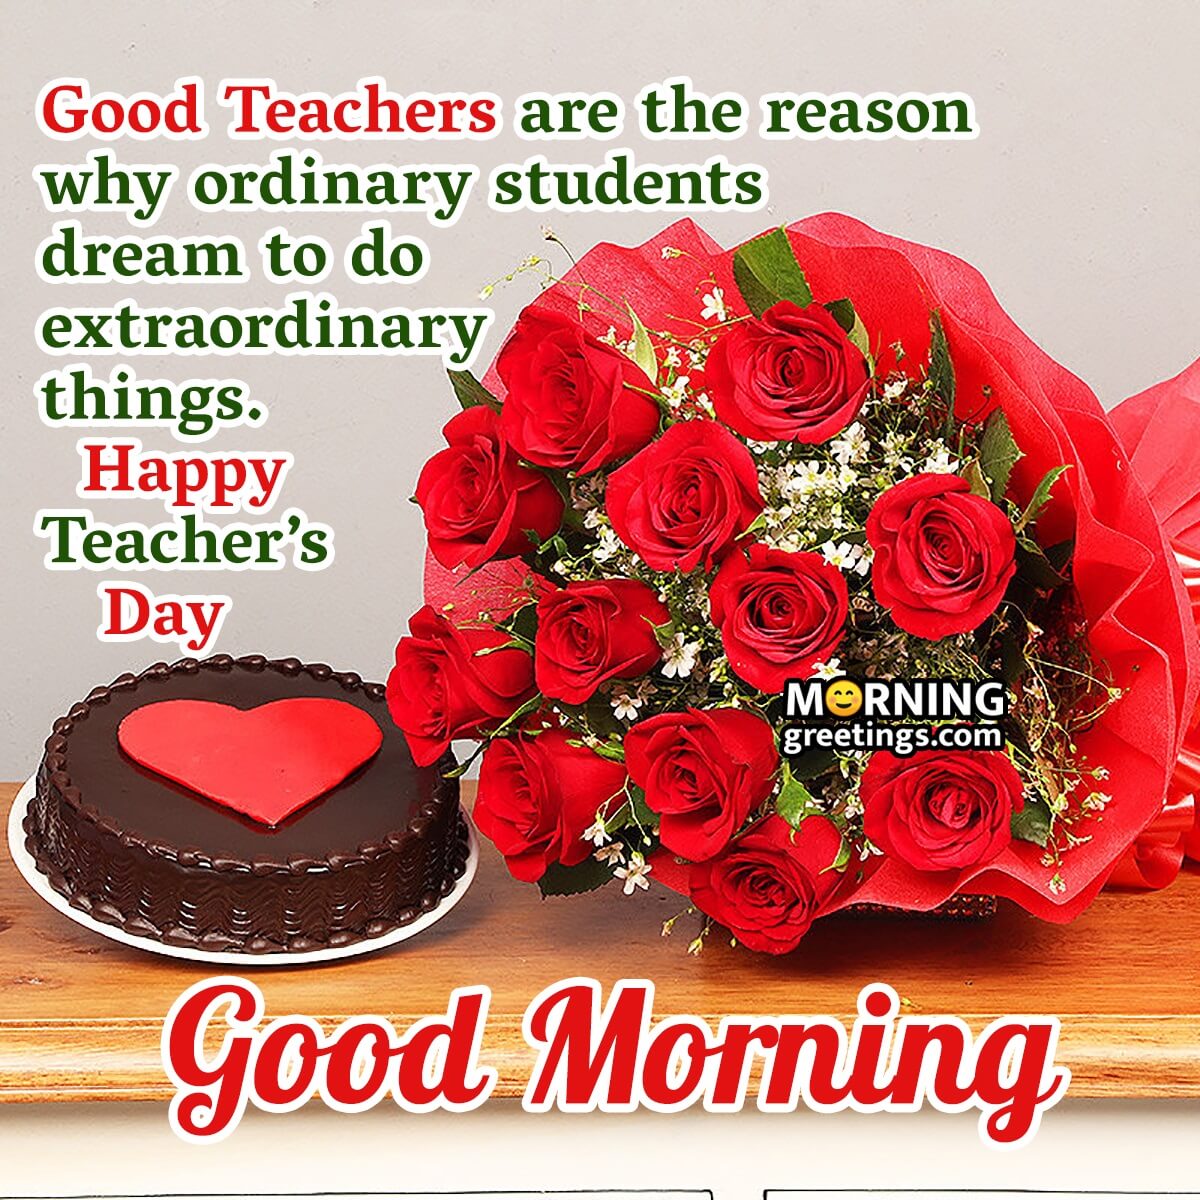 Good Morning Teacher's Day Quote Image